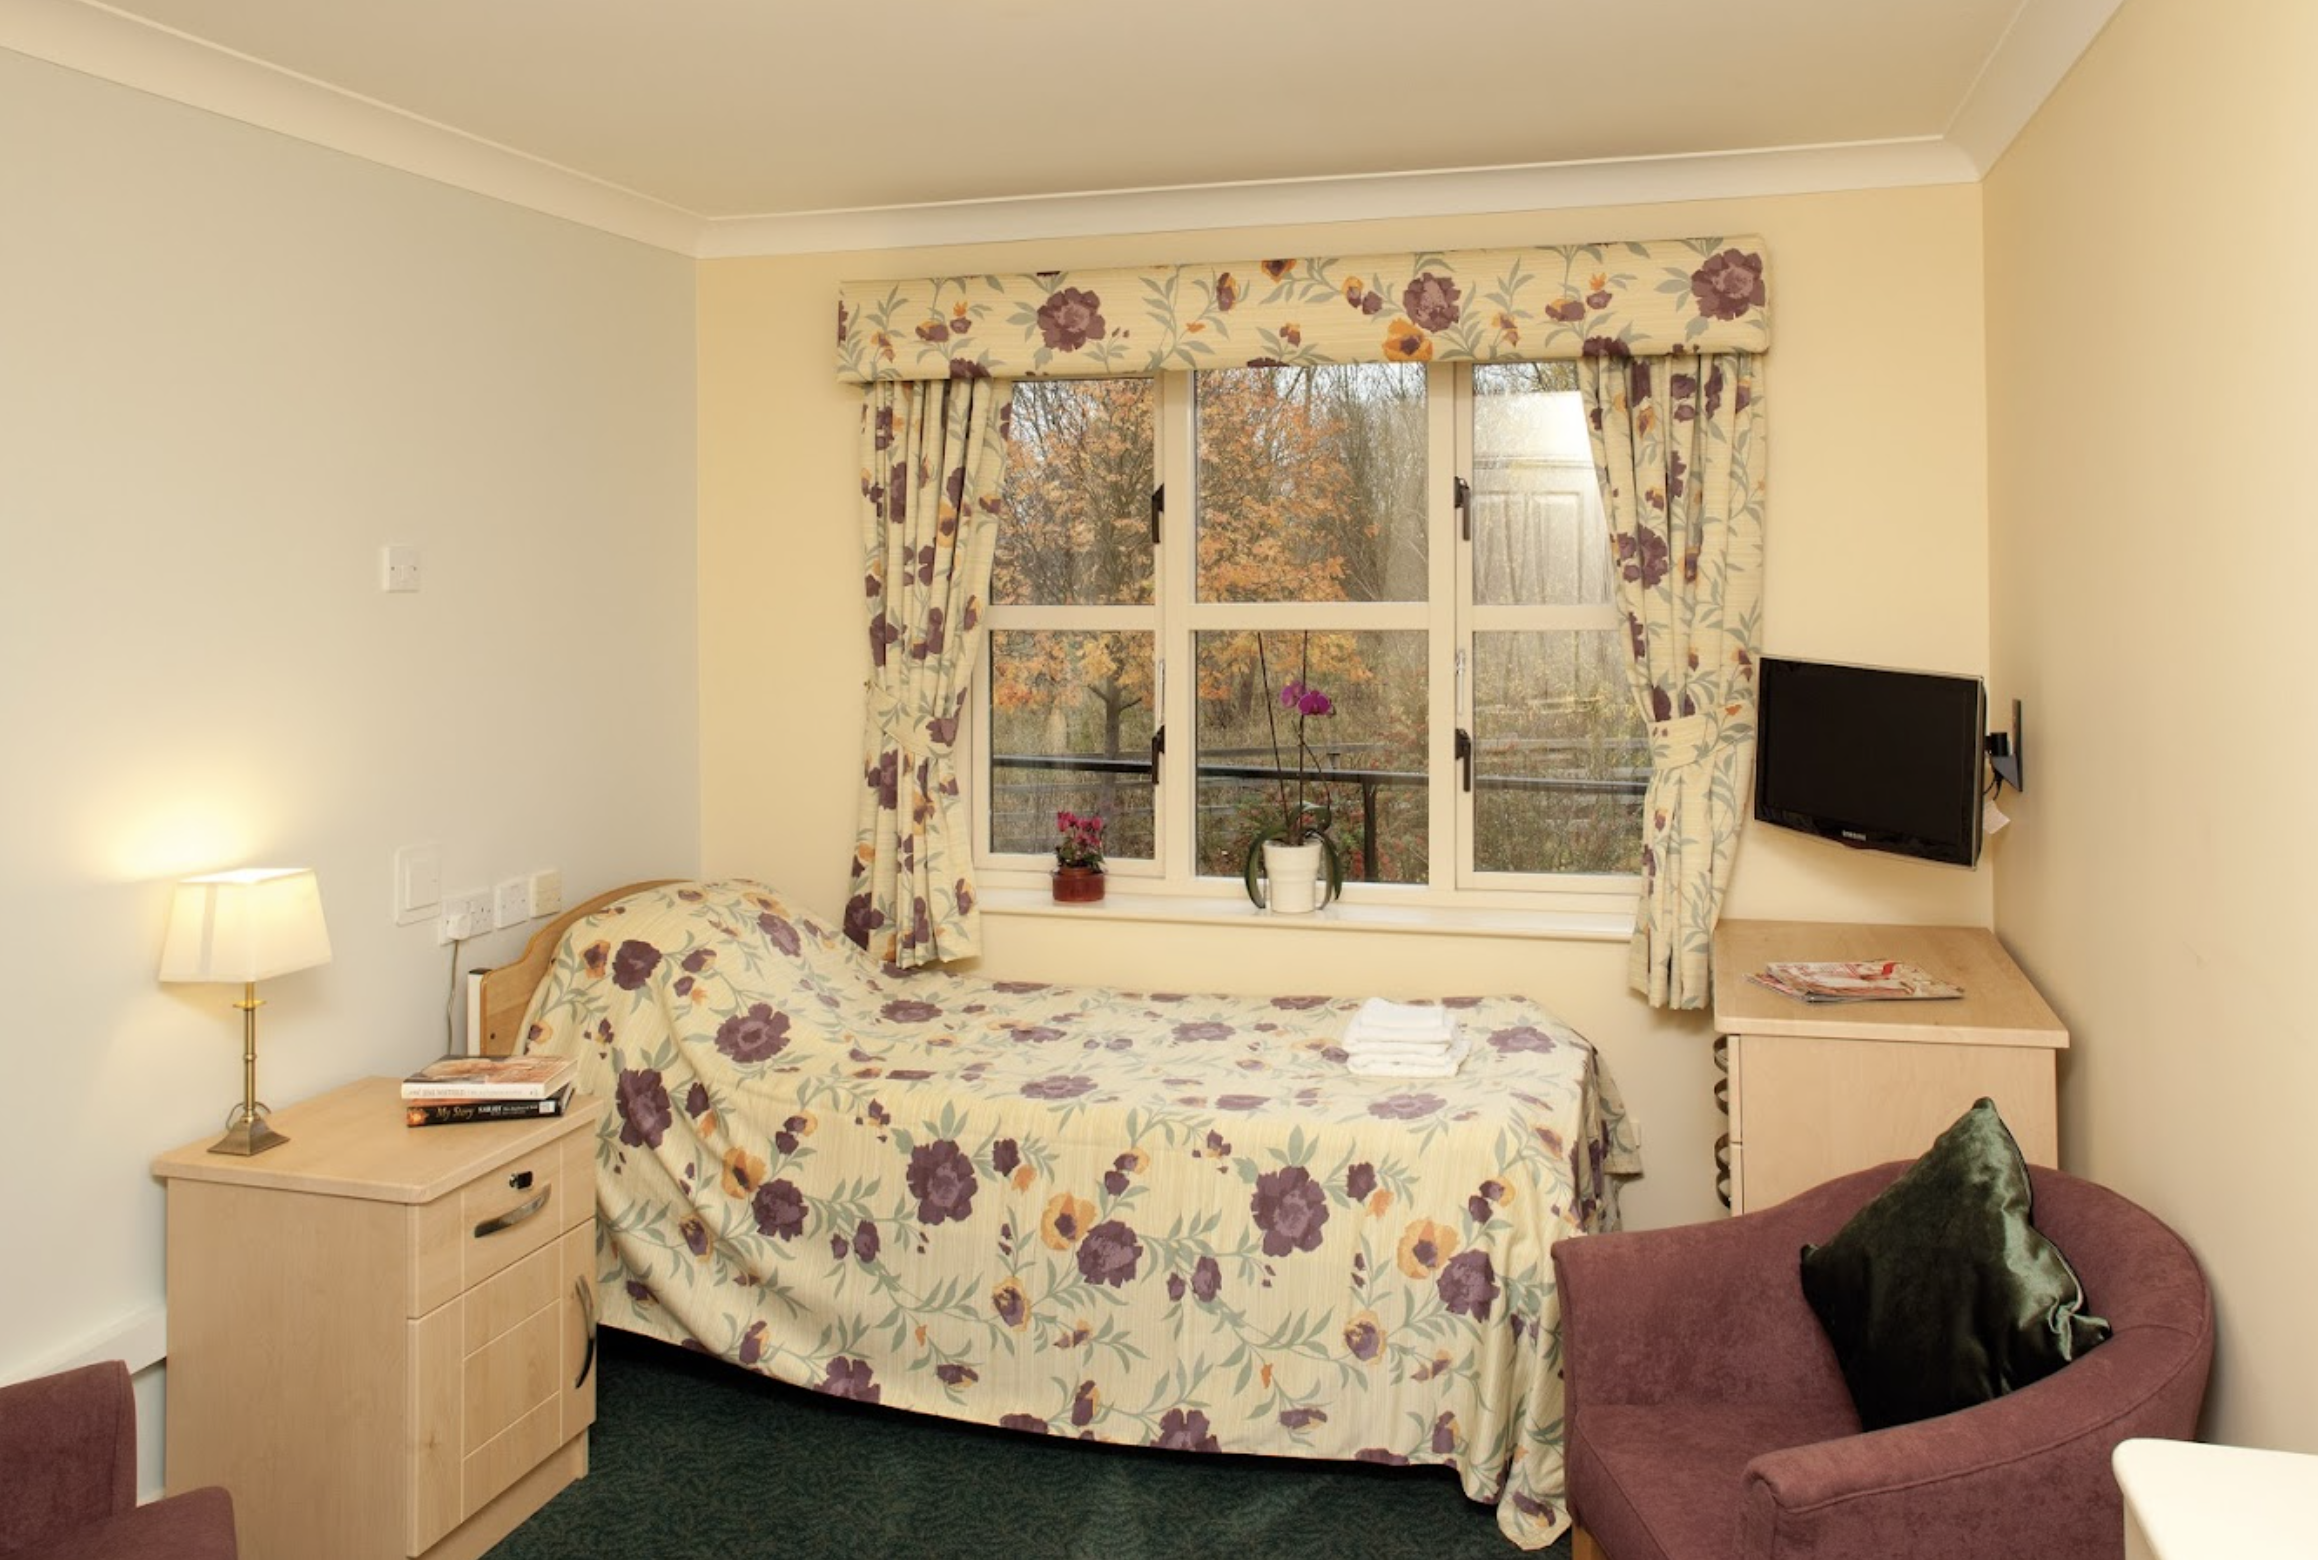 Bedroom of The Priory care home in Solihull, West Midlands